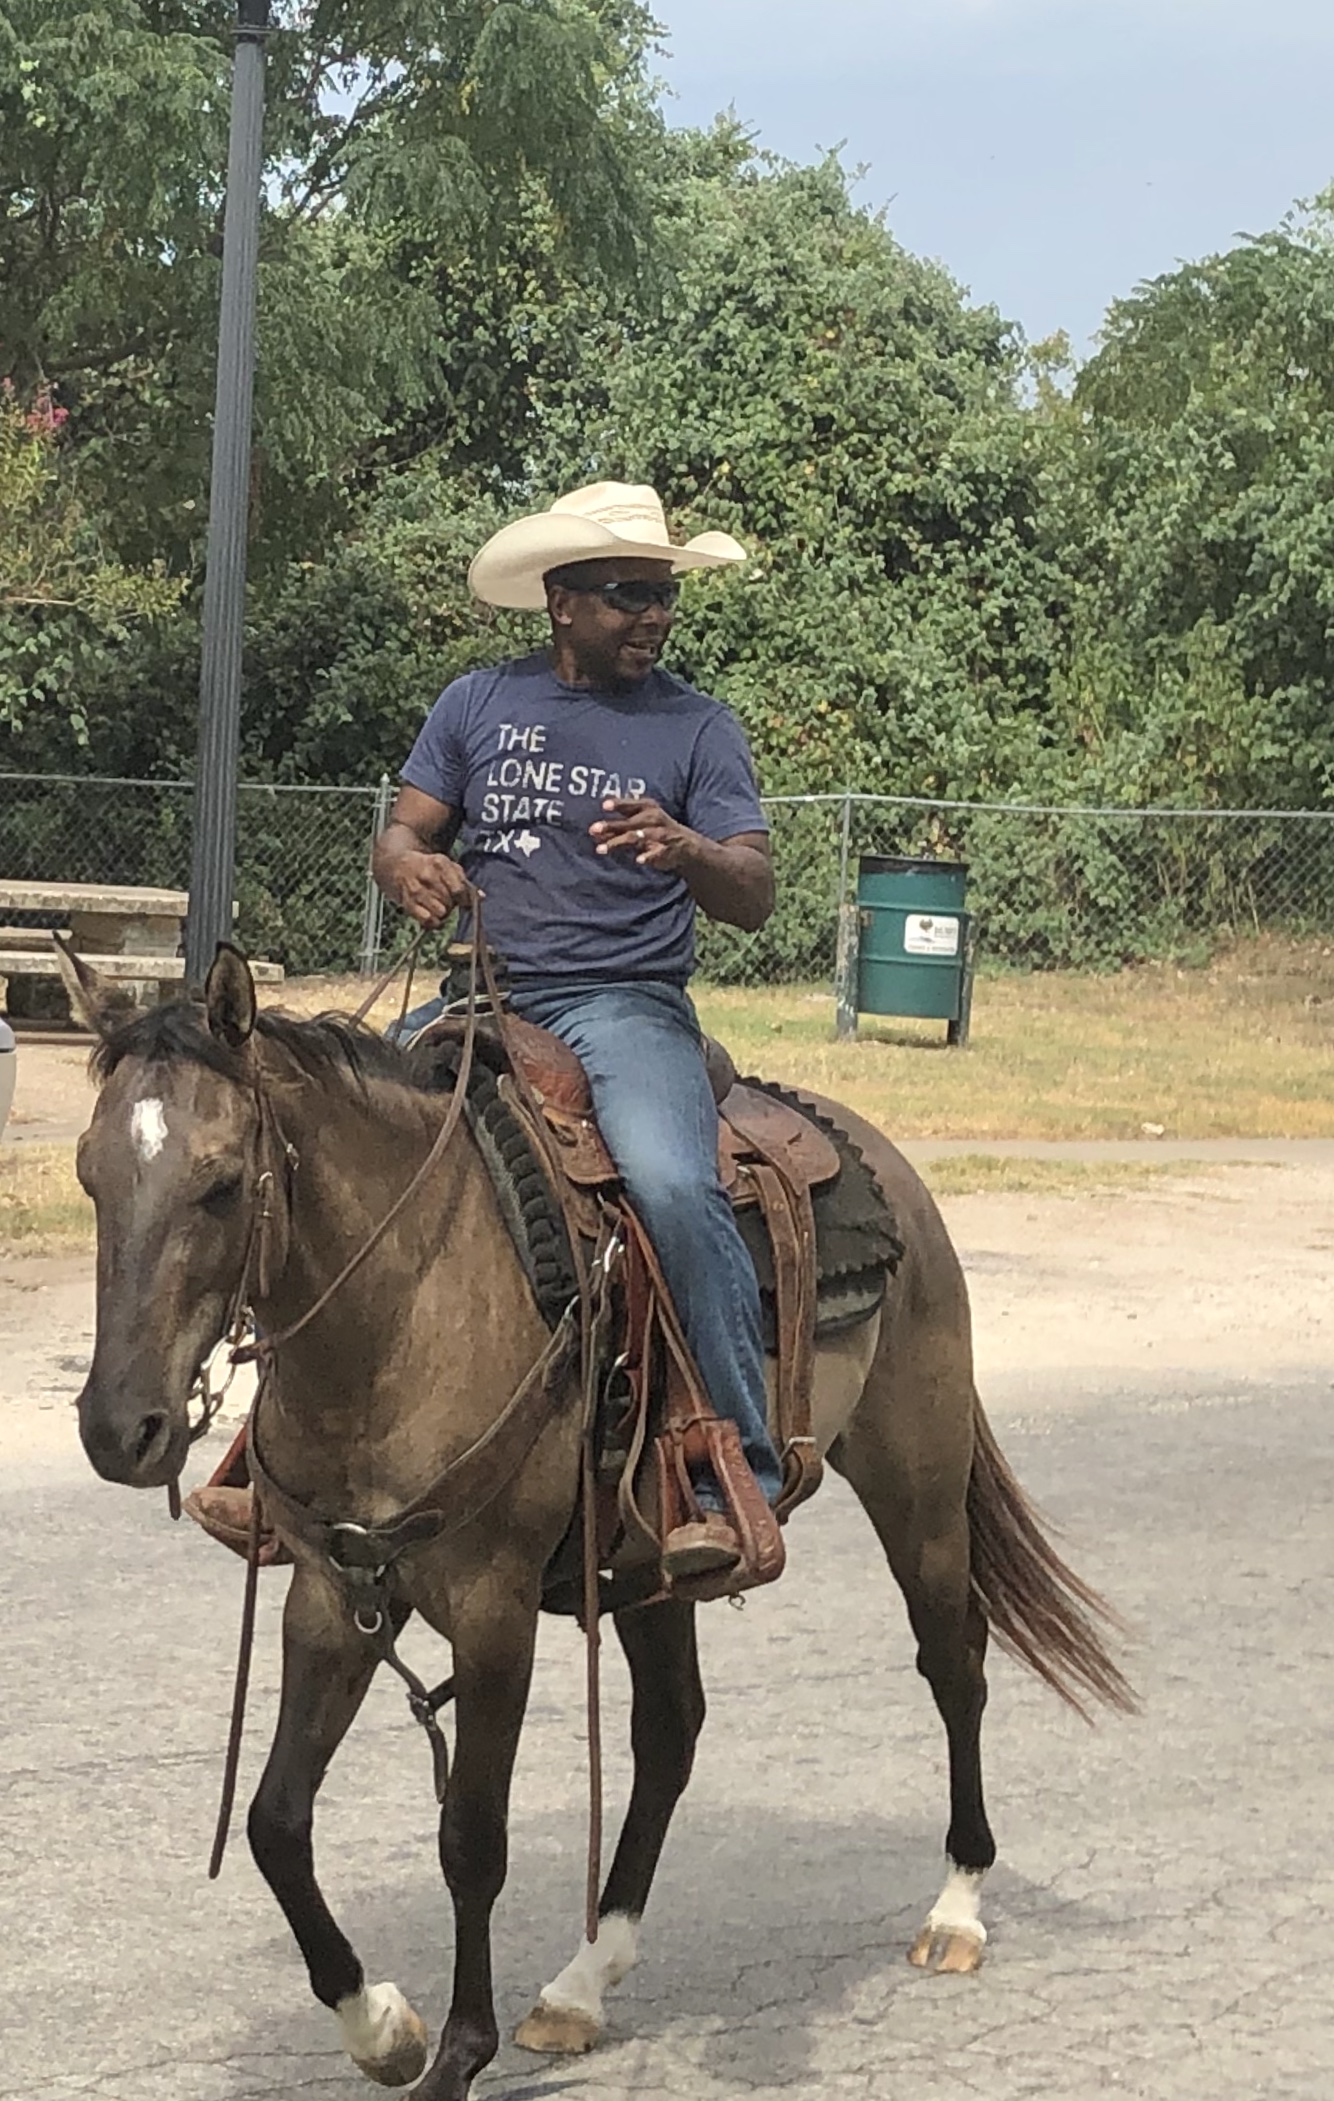 Bastrop celebrates 72nd with parade, rodeo Elgin Courier